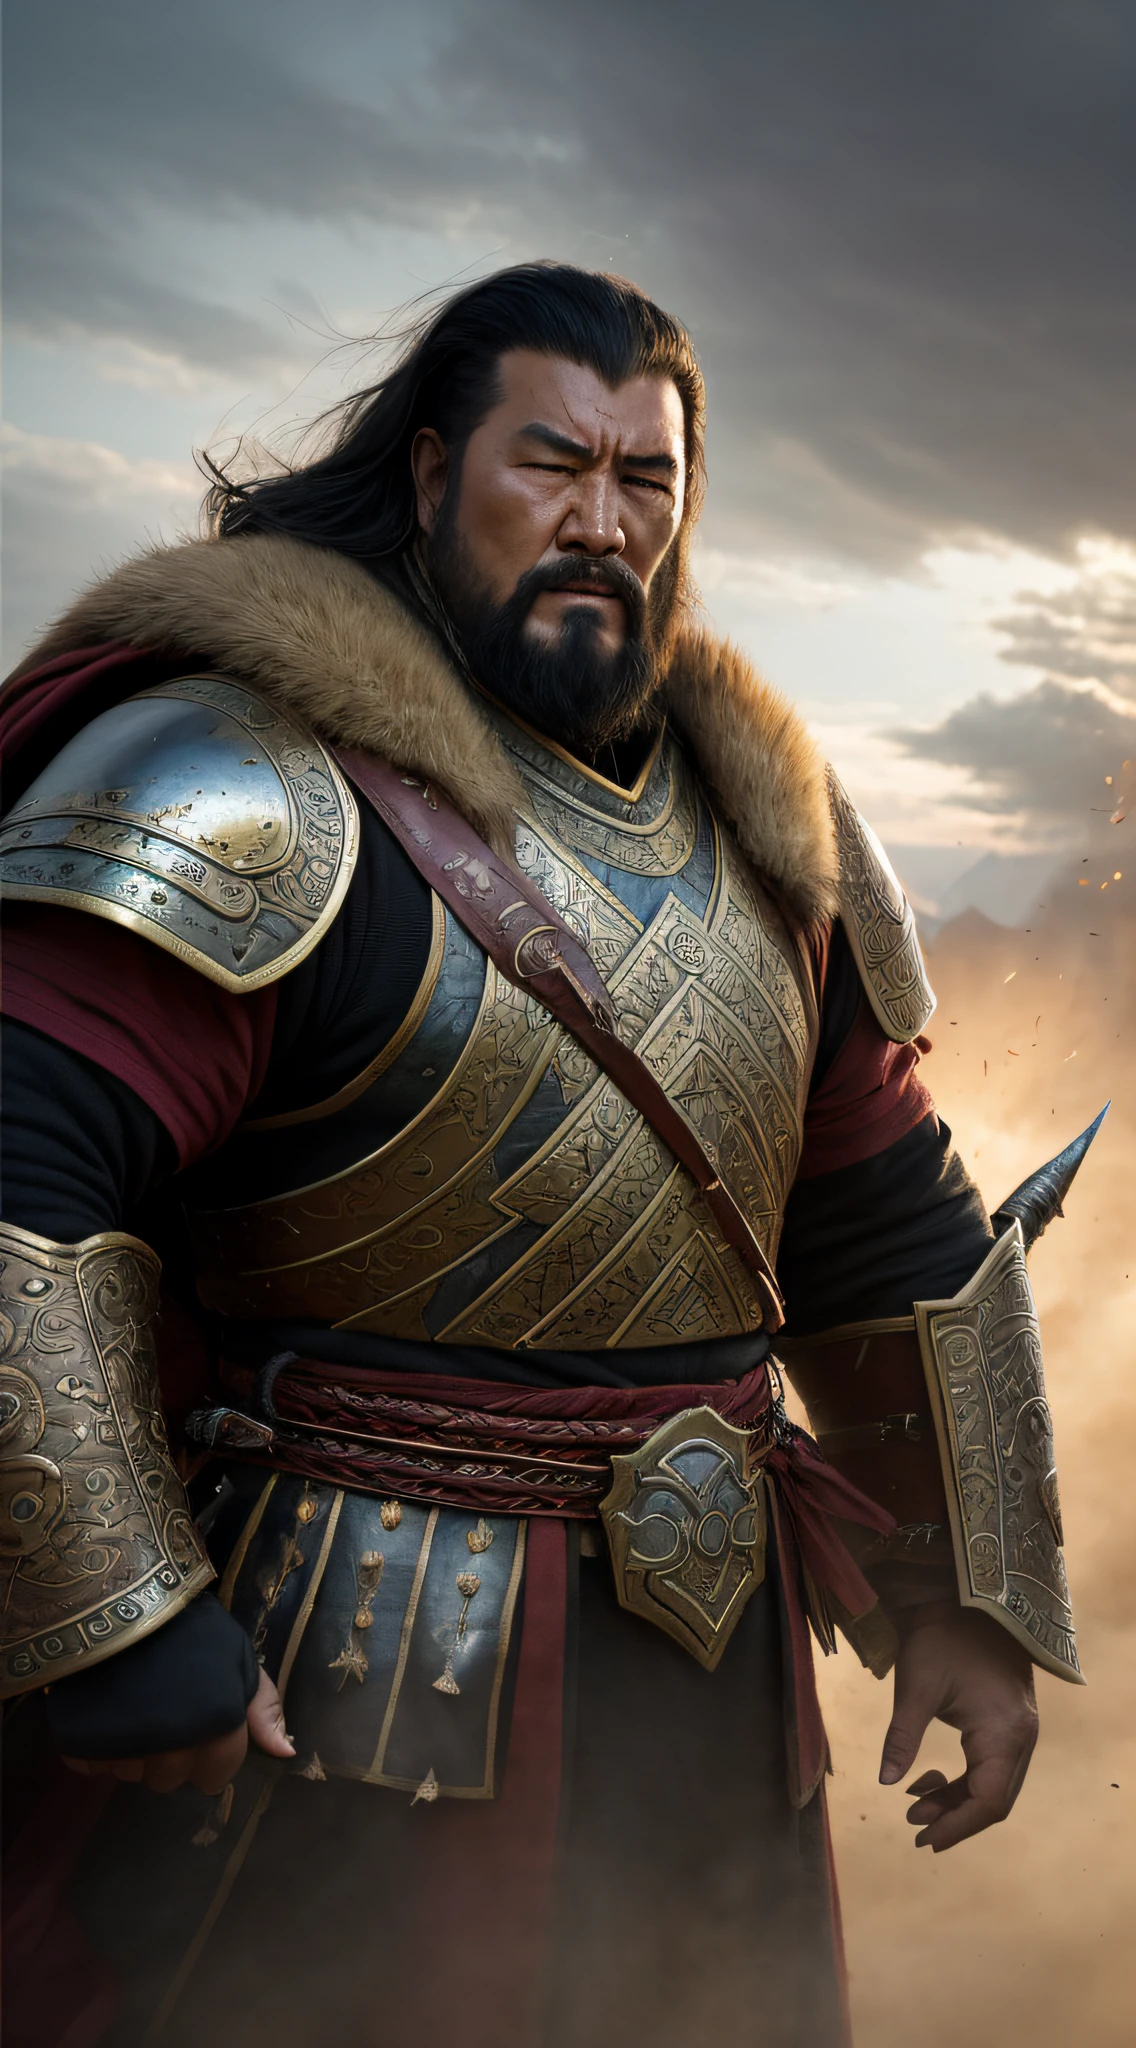 (best quality, high resolution, realistic style:1.2, by Greg Rutkowski), Genghis Khan, (striking fear with his appearance:1.3), donning formidable Mongolian battle armor, battle-hardened expression, commanding presence, intimidating atmosphere, smoky battlefield, dust clouds billowing, warriors in chaos, intense lighting casting dynamic shadows, capturing the essence of the conqueror's might.